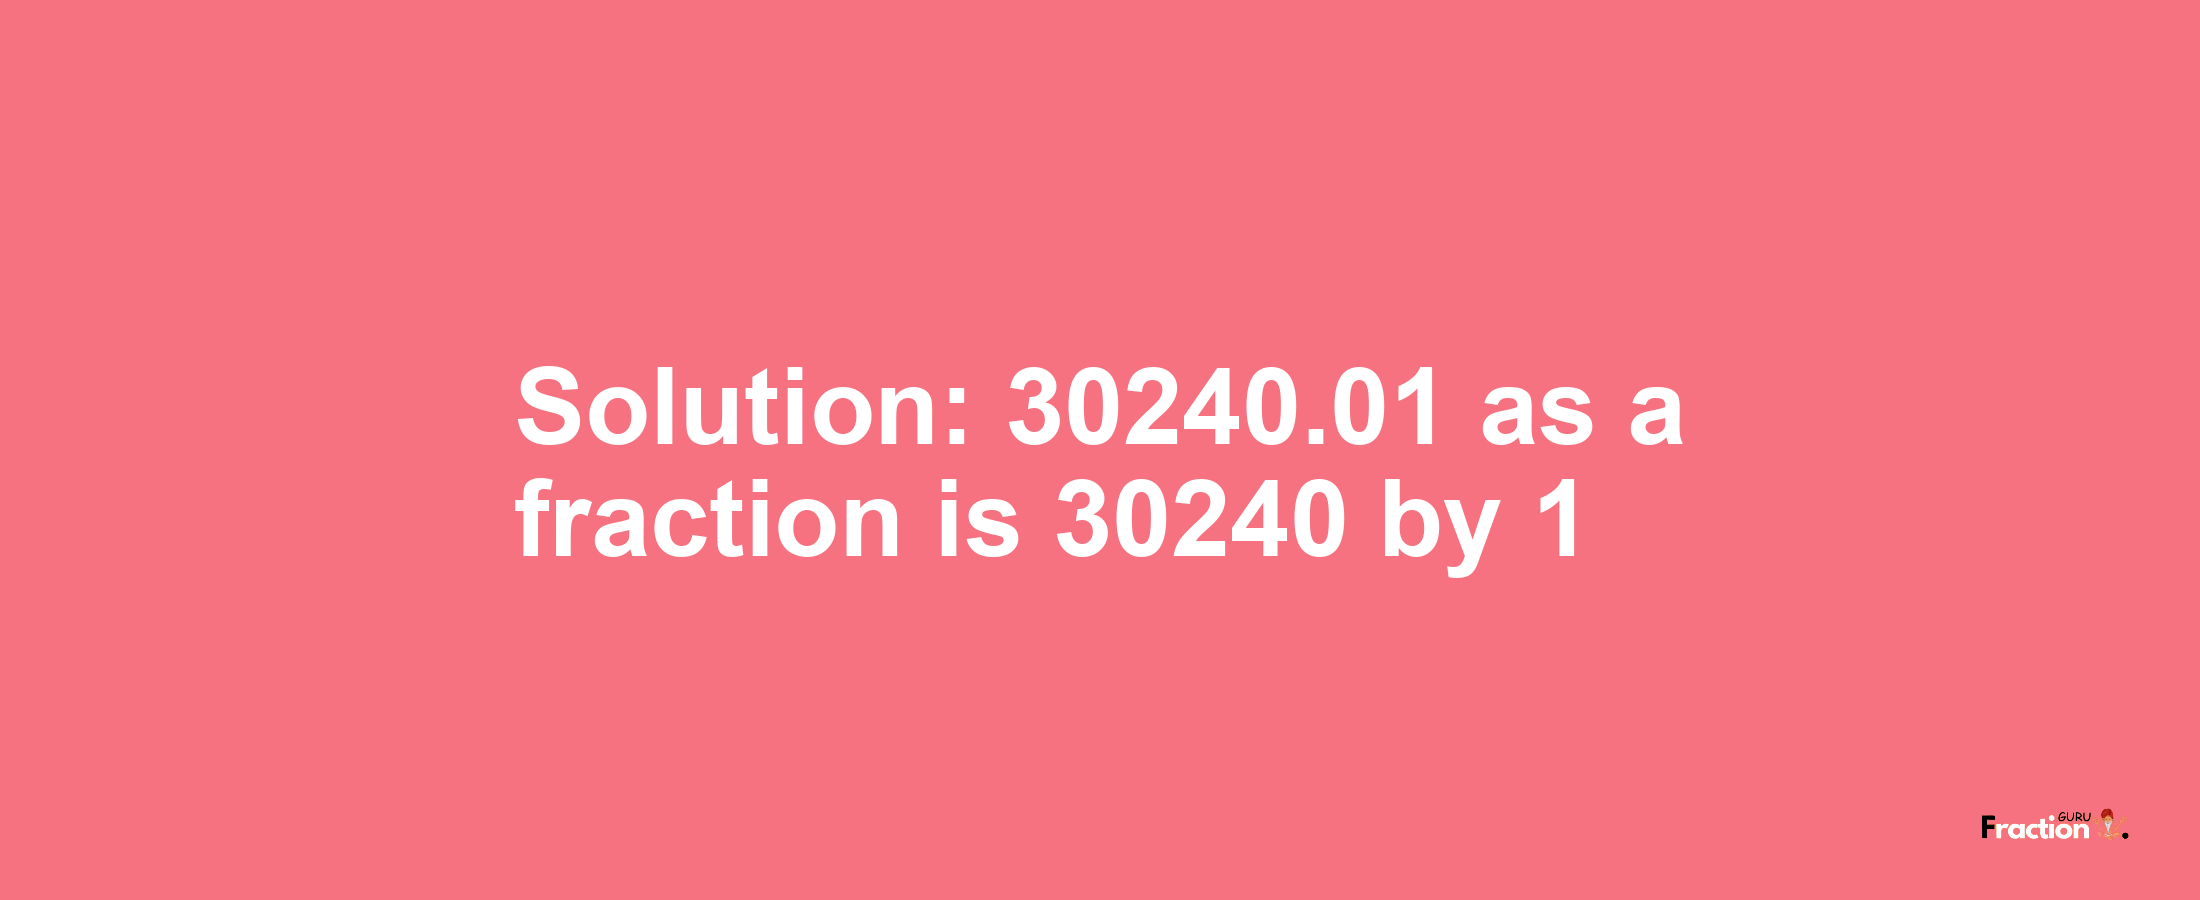 Solution:30240.01 as a fraction is 30240/1